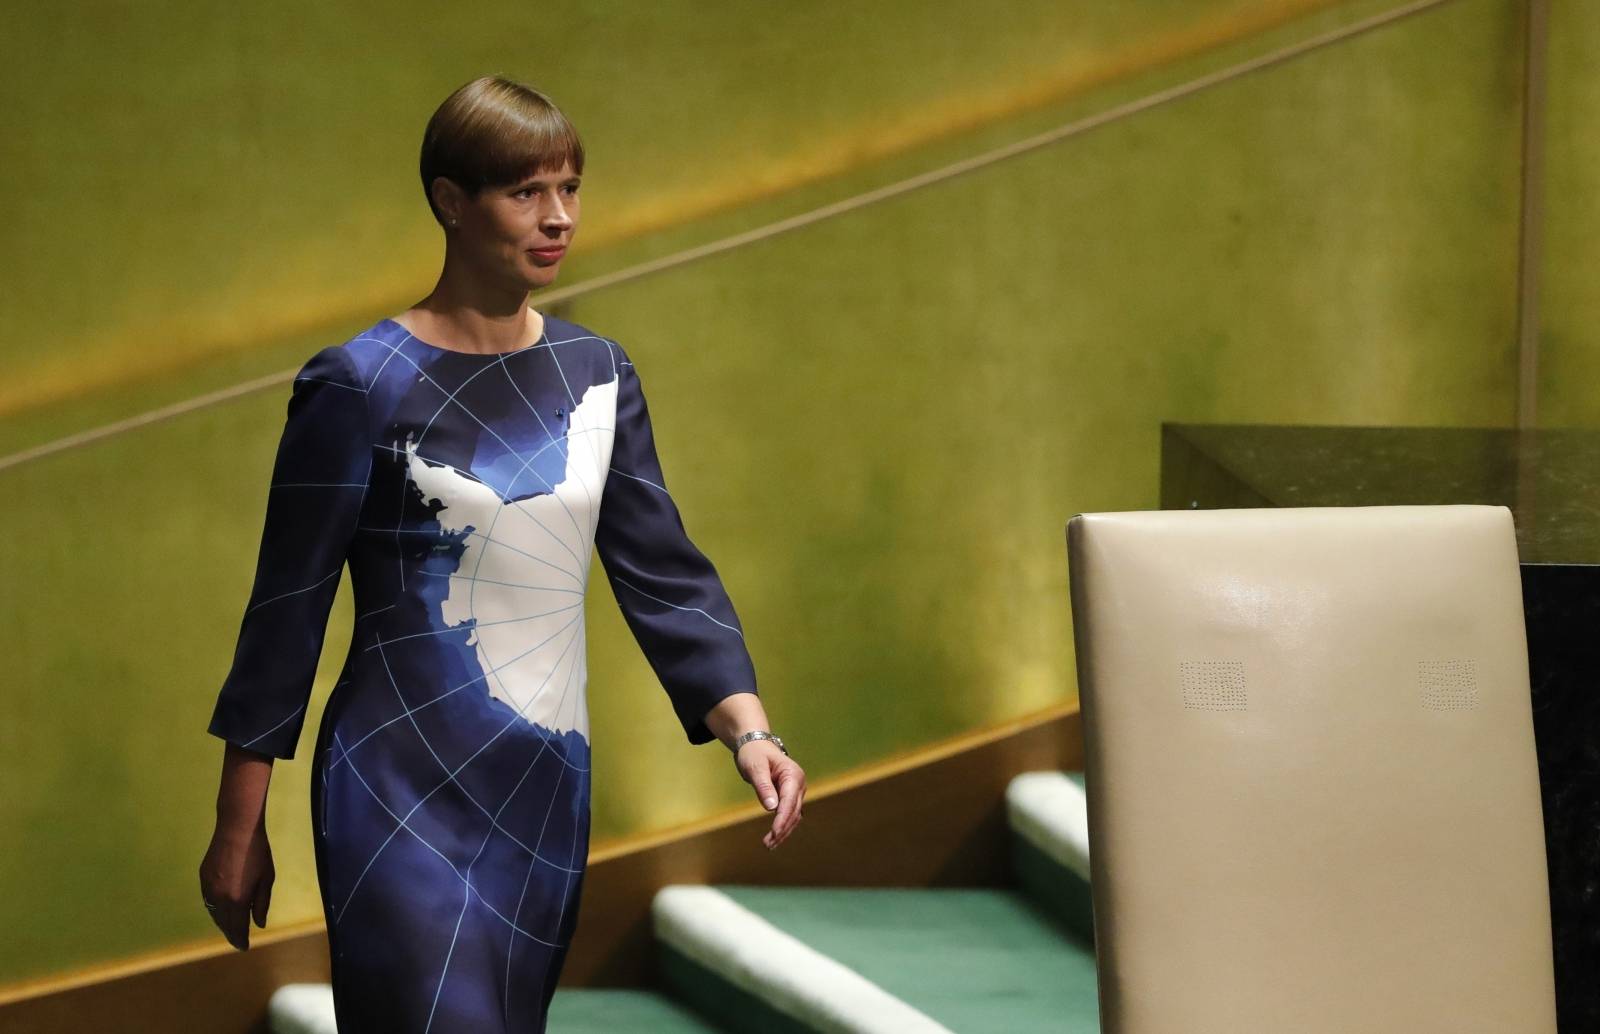 Estonia's President Kersti Kaljulaid arrives to address the 74th session of the United Nations General Assembly at U.N. headquarters in New York City, New York, U.S.